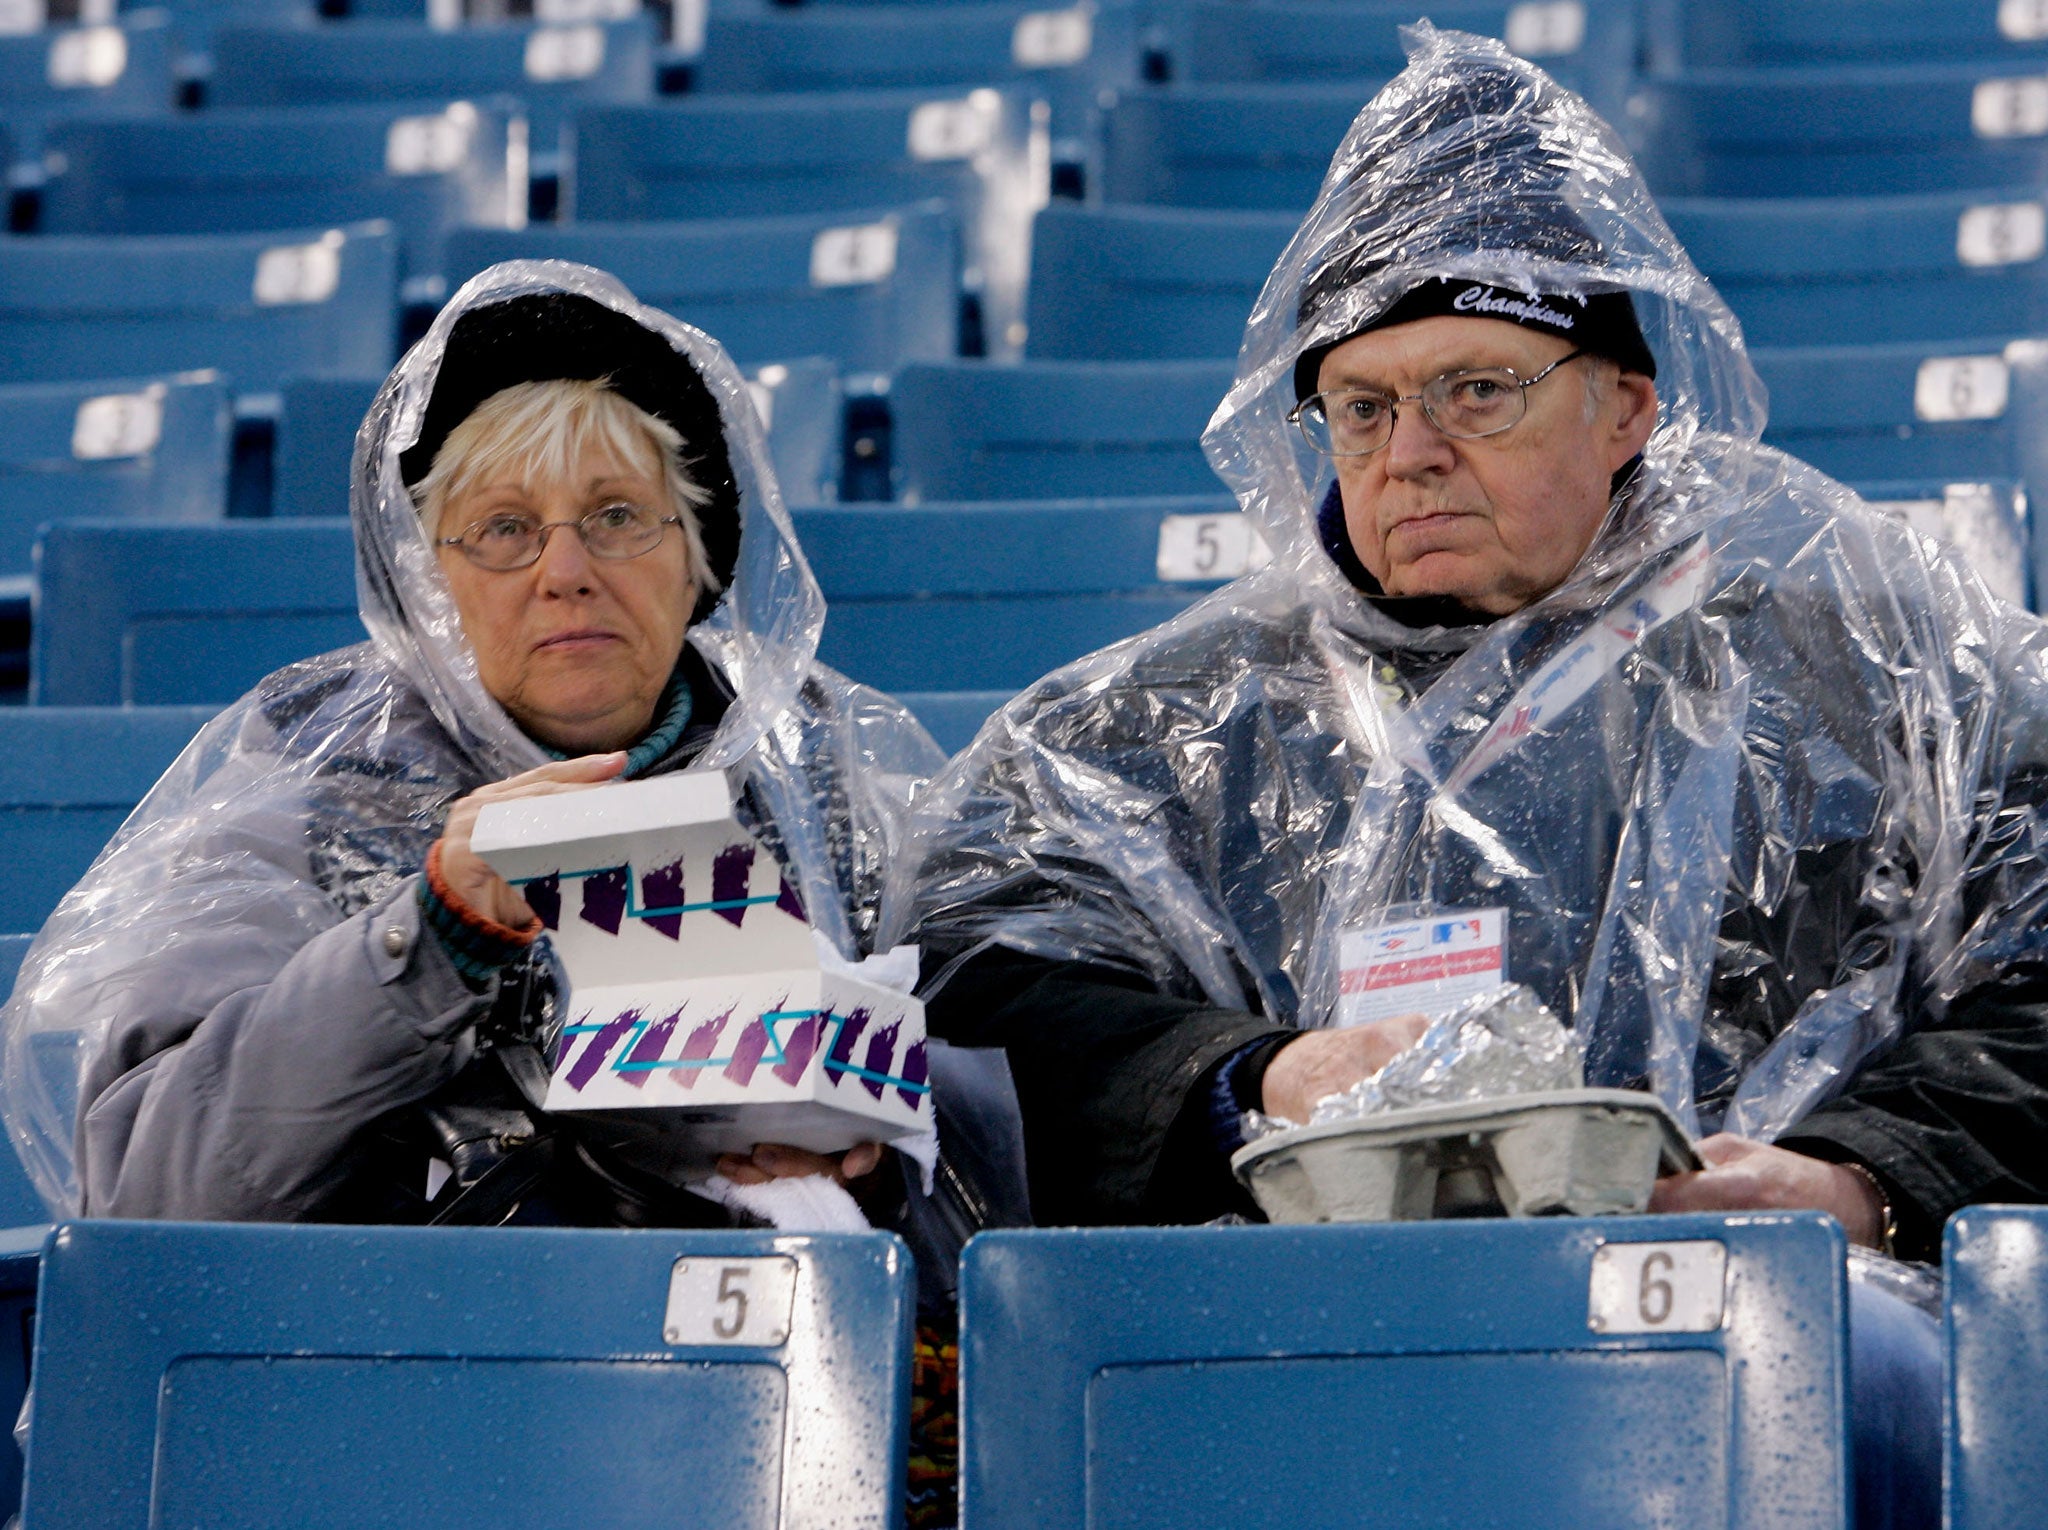 Chicago White Sox fans bundle up in rain gear before the start of Game Two of the 2005 Major League Baseball World Series between the Chicago White Sox and the Houston Astros at U.S. Celluar Field on October 23, 2005 in Chicago, Illinois.